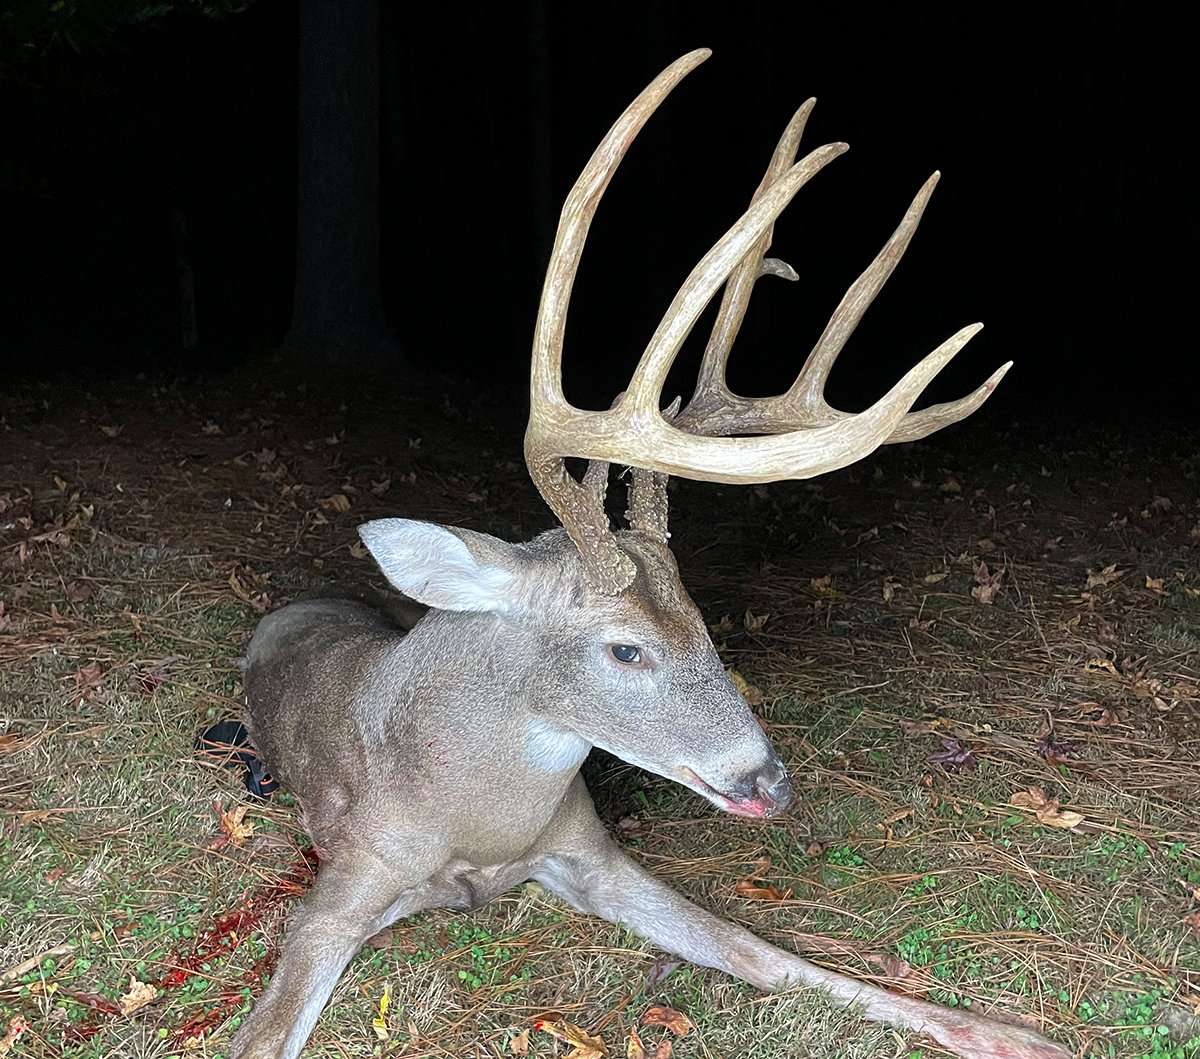 Even thought the buck had a narrow frame, the incredible tine length scored well.